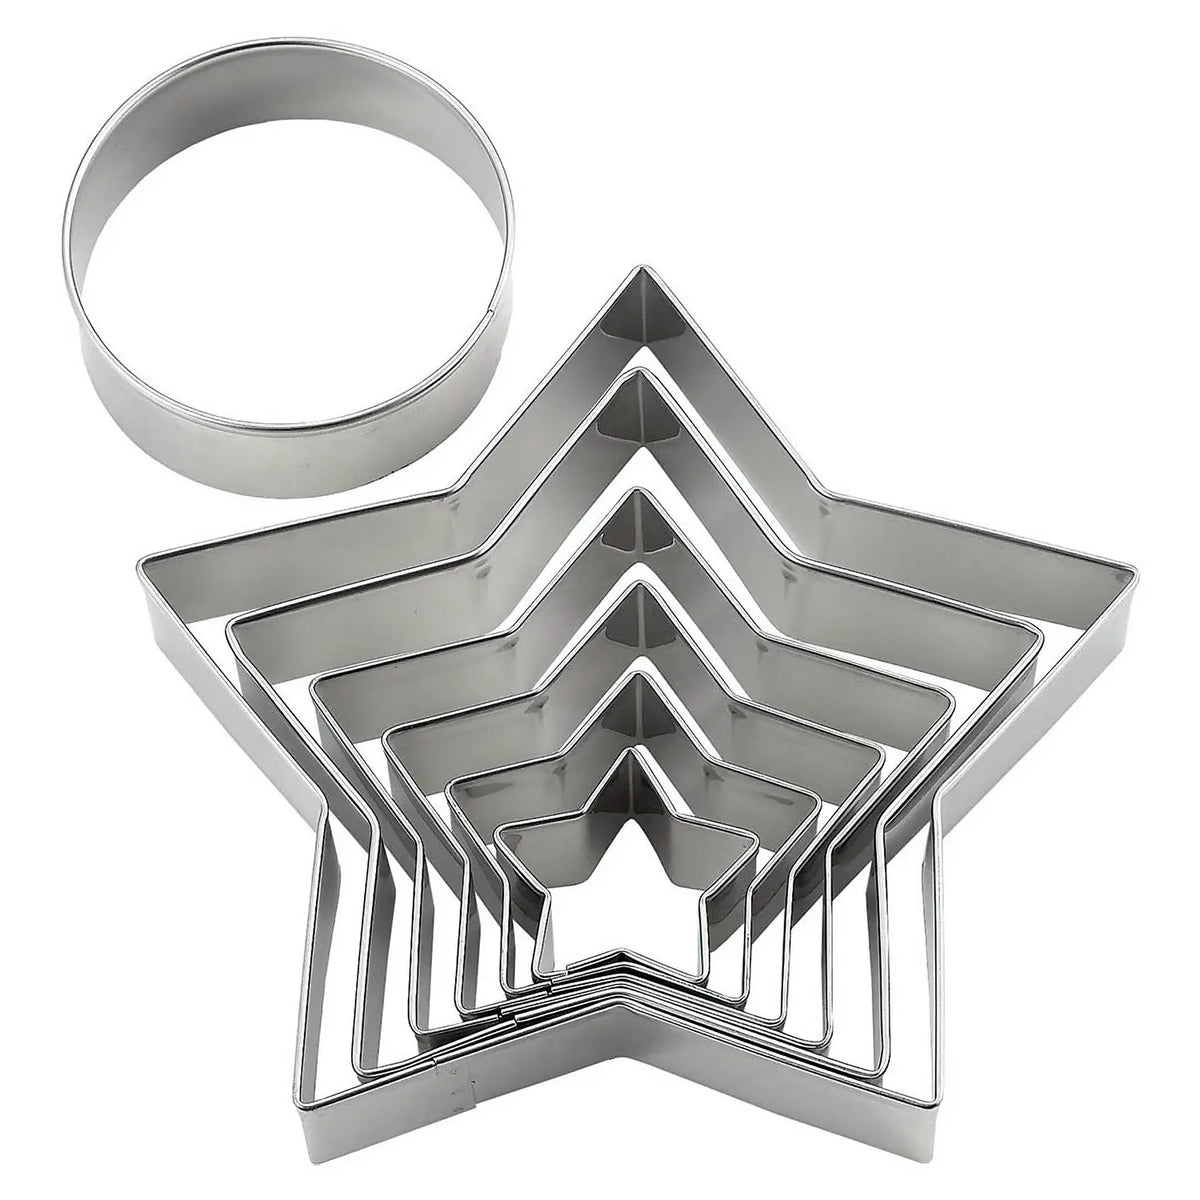 TIGERCROWN Cake Land Stainless Steel Cookie Cutter Christmas Tree 7pcs